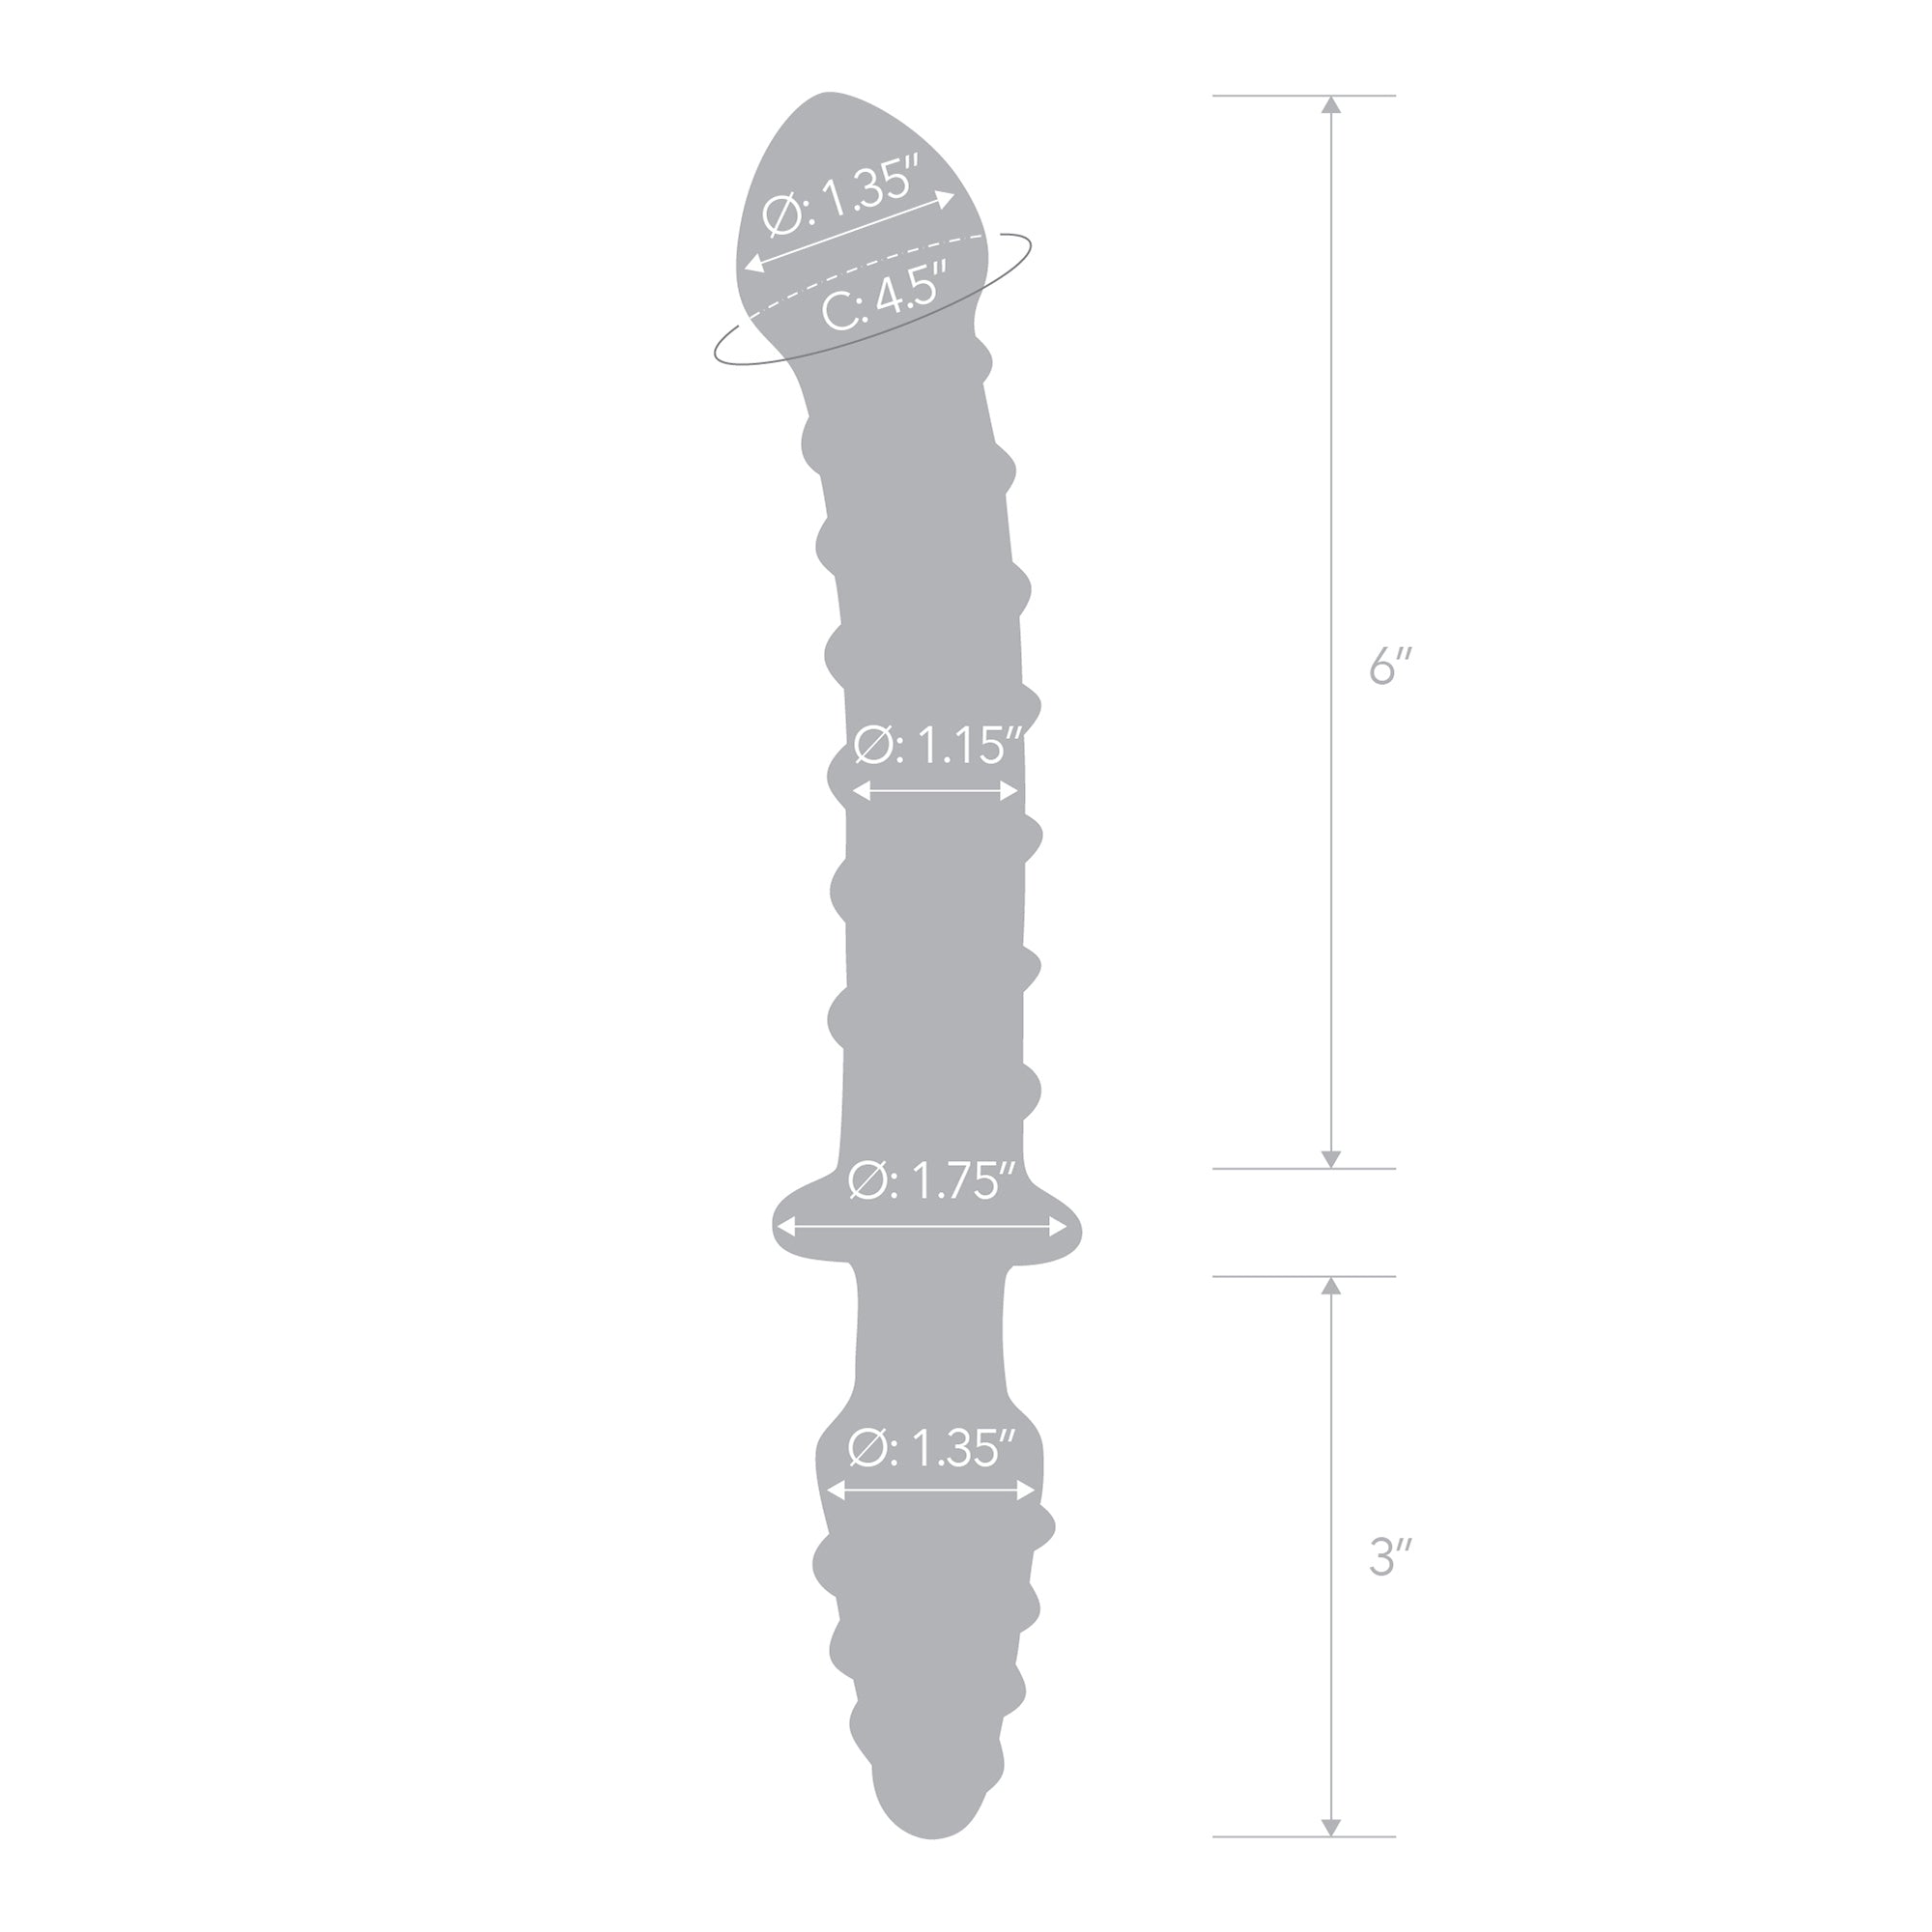 Specifications of the Gläs 10 inch Mr. Swirly Double Ended Glass Dildo and Butt Plug